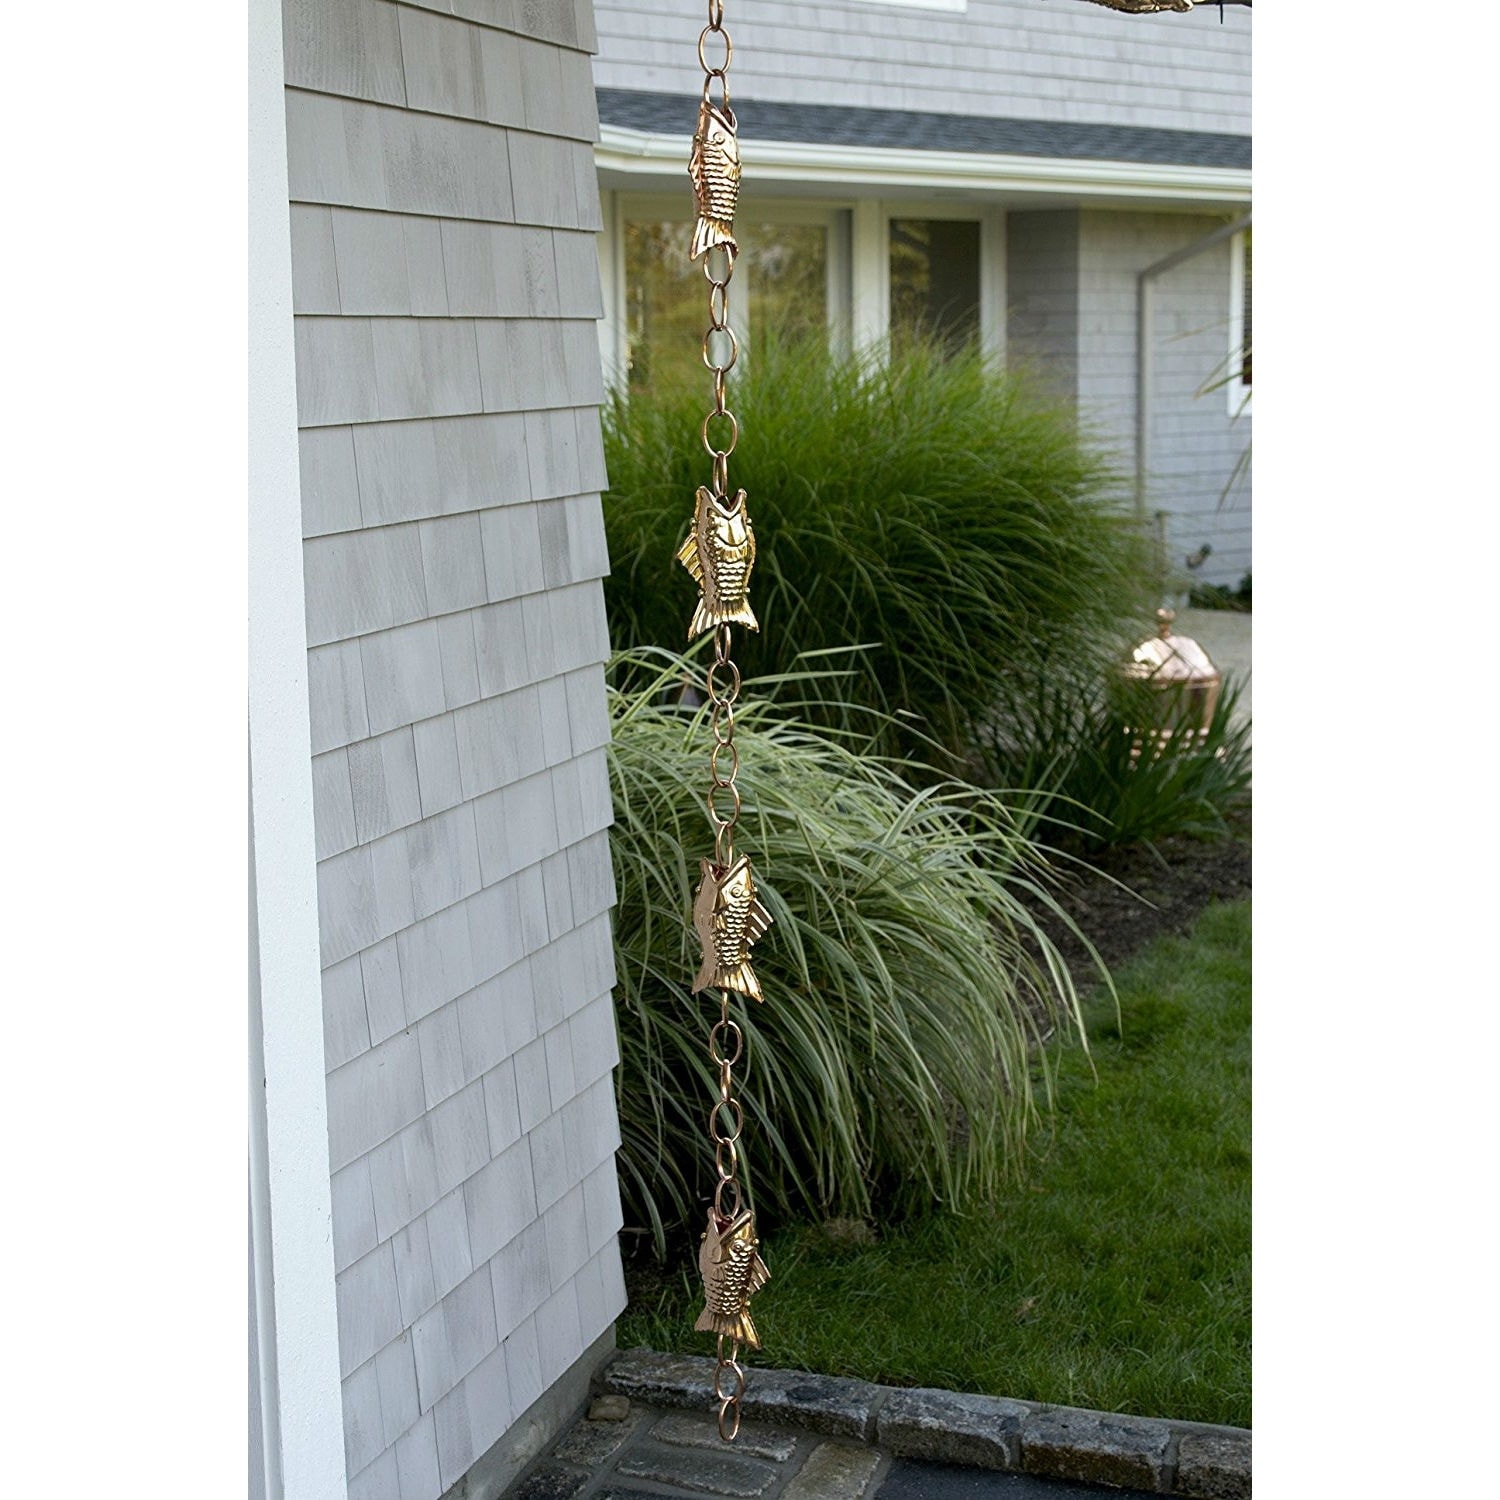 Daily Boutik Pure Polished Copper 8.5 Foot Rain Chain with Fish Bed  Bath  Beyond 35753489